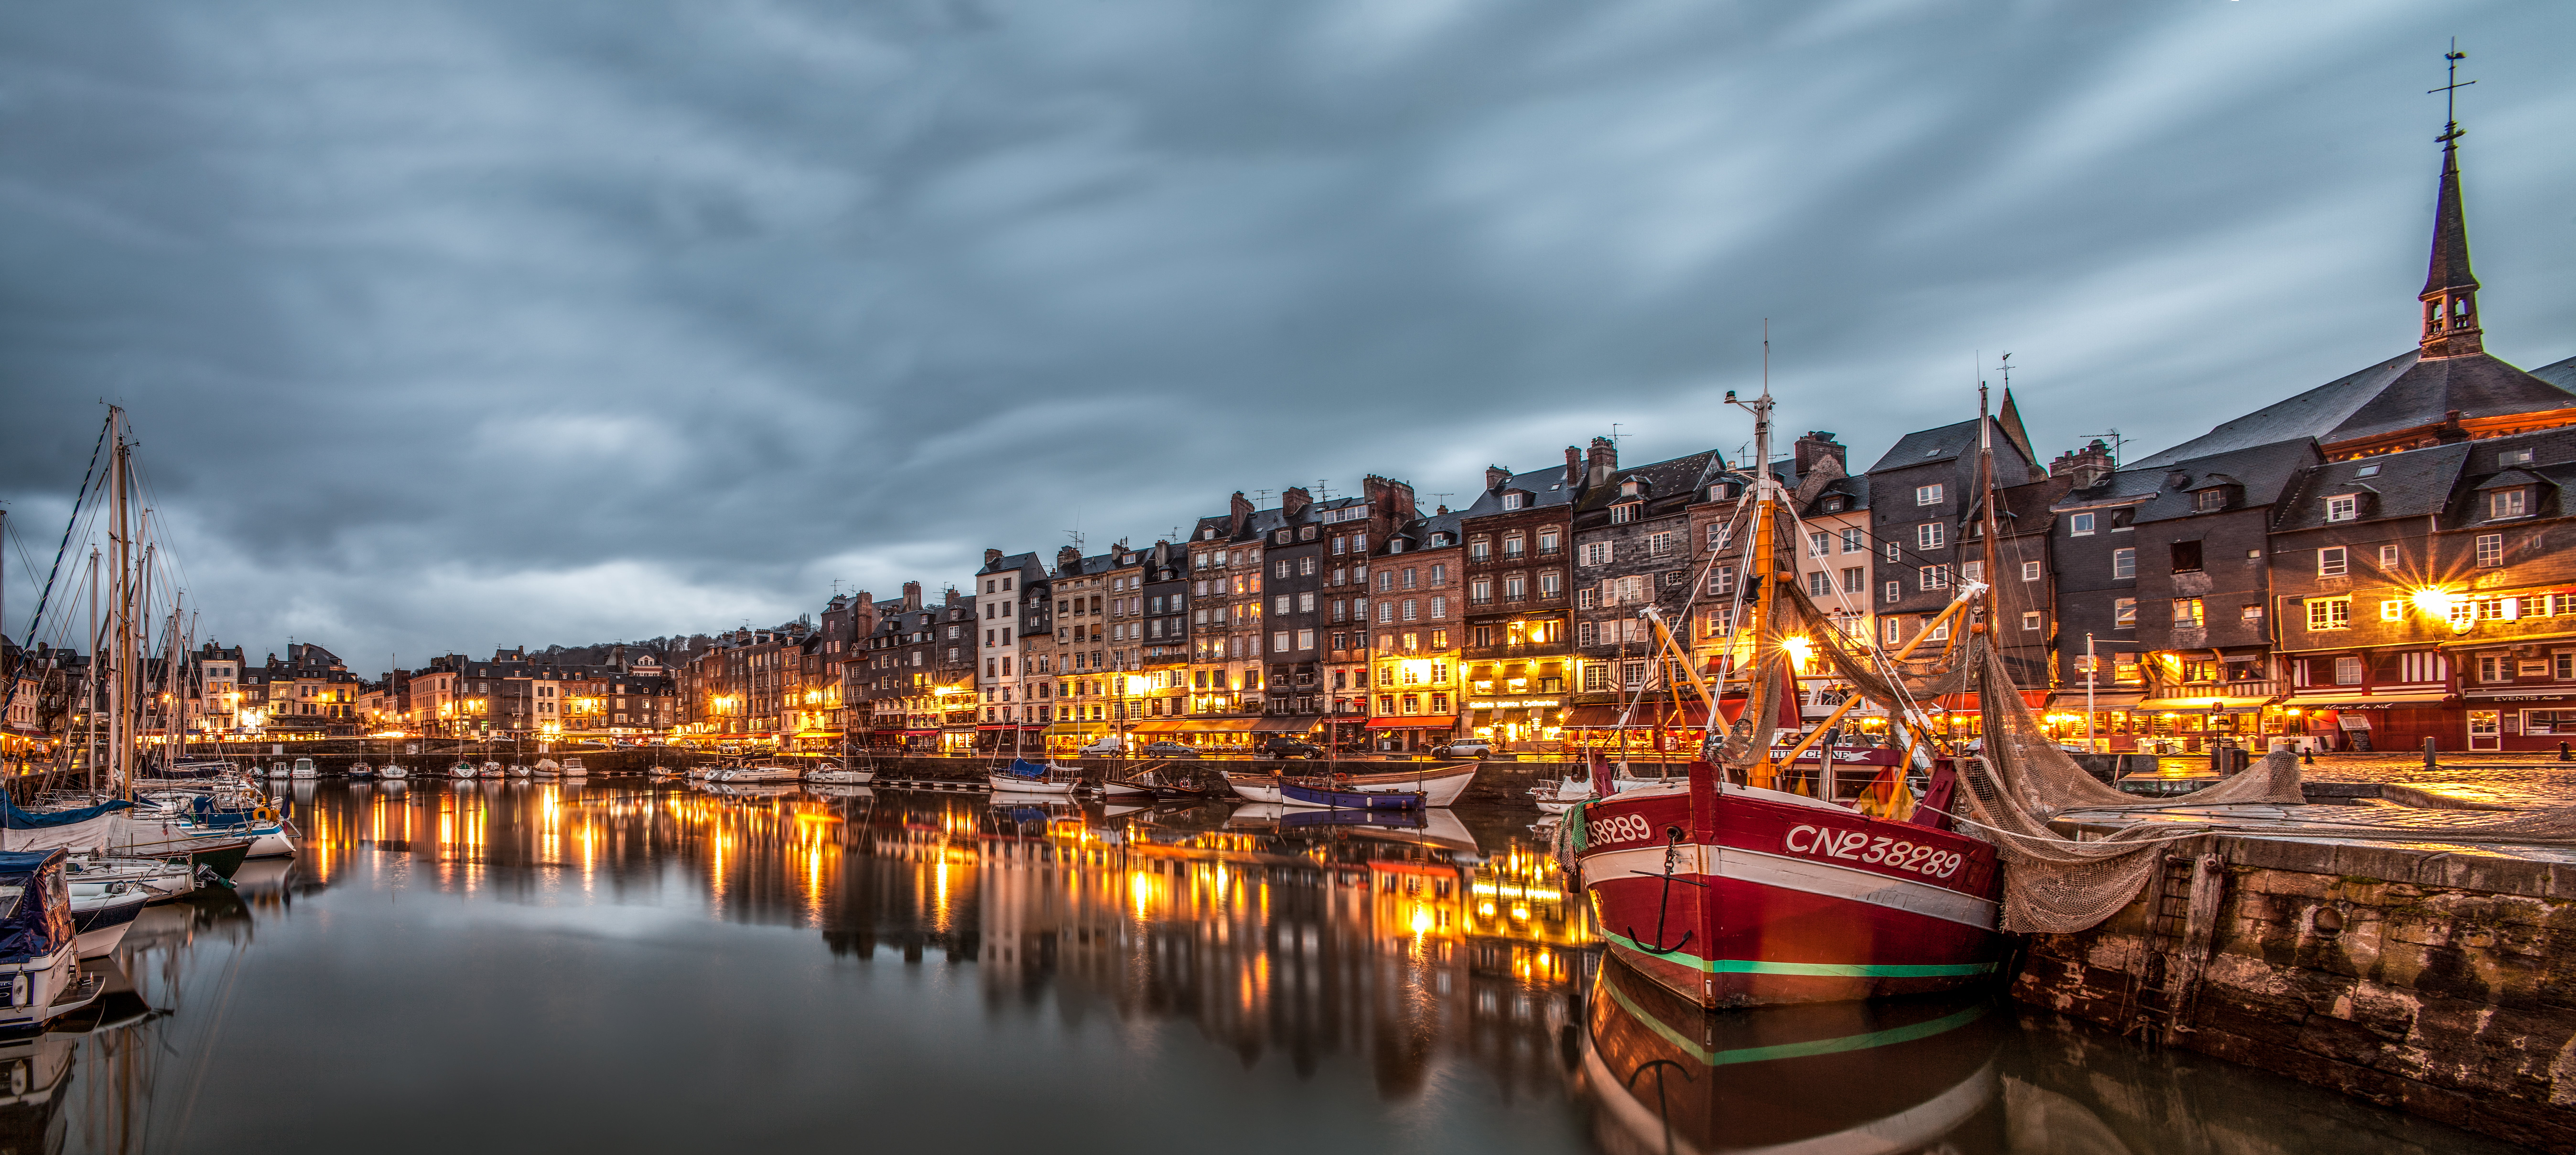 Landscape Photography Of Grand Canal Venice Italy Honfleur HD